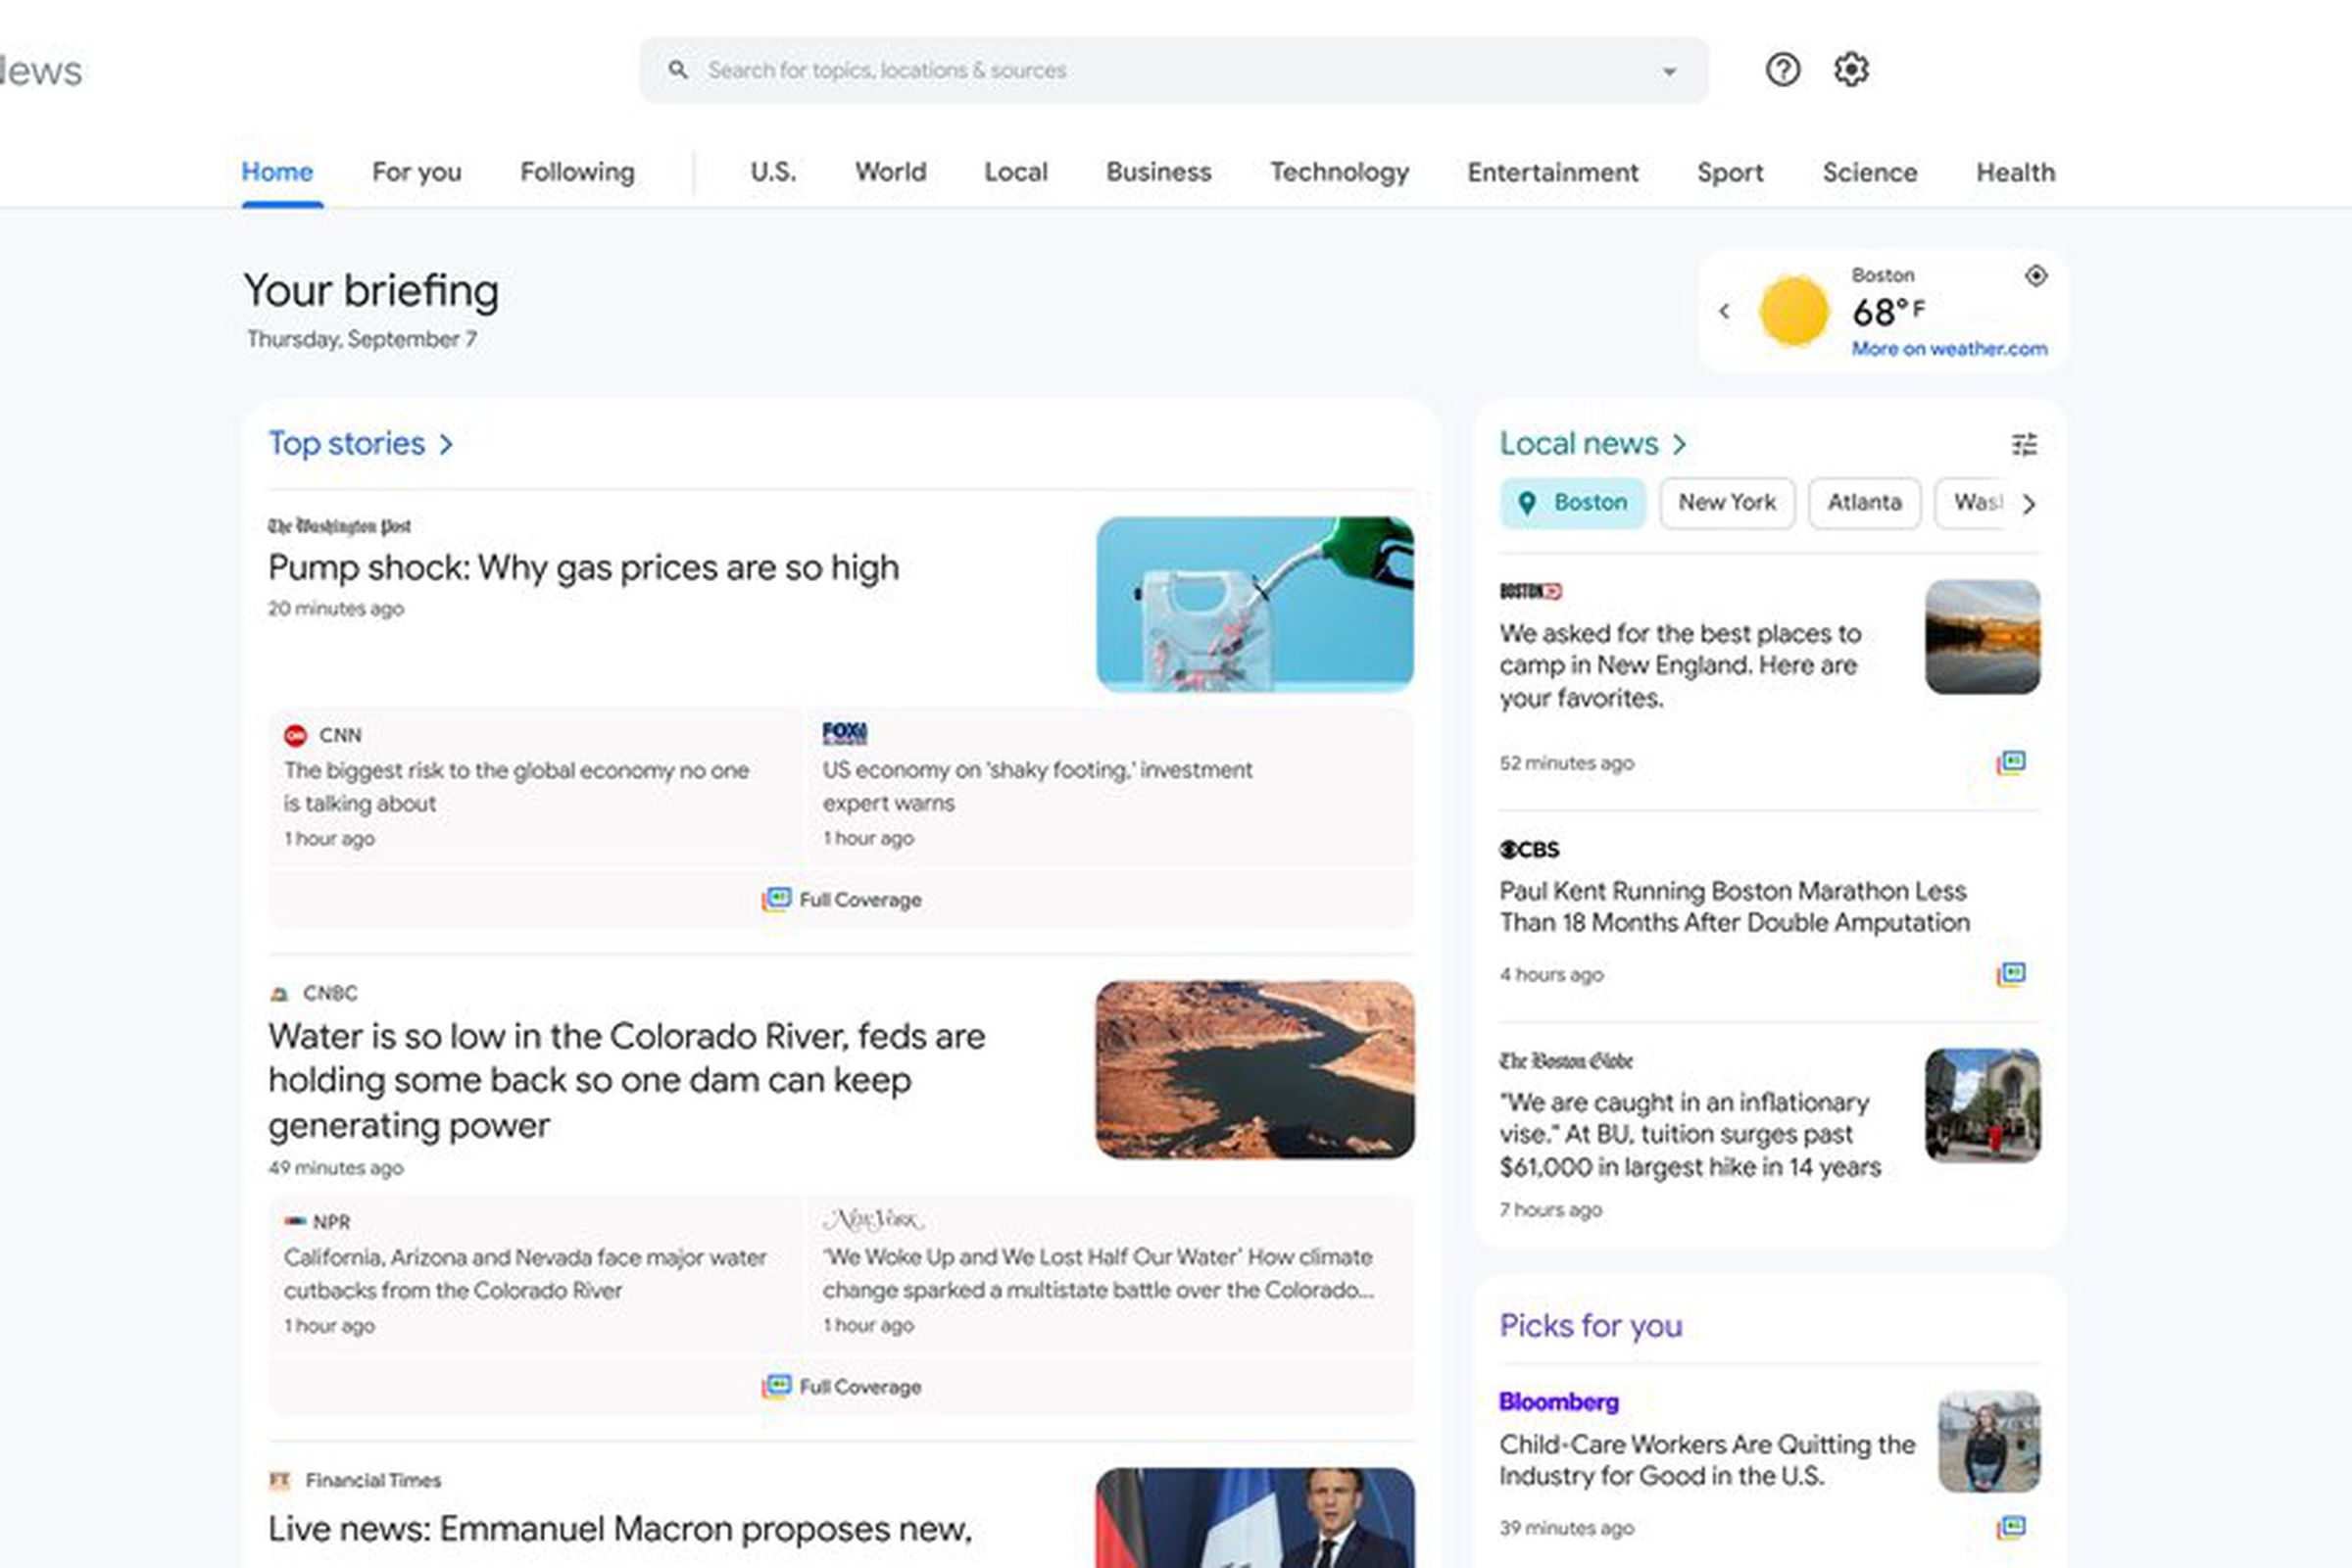 The new-look Google News makes local news and custom topics easier to find. 